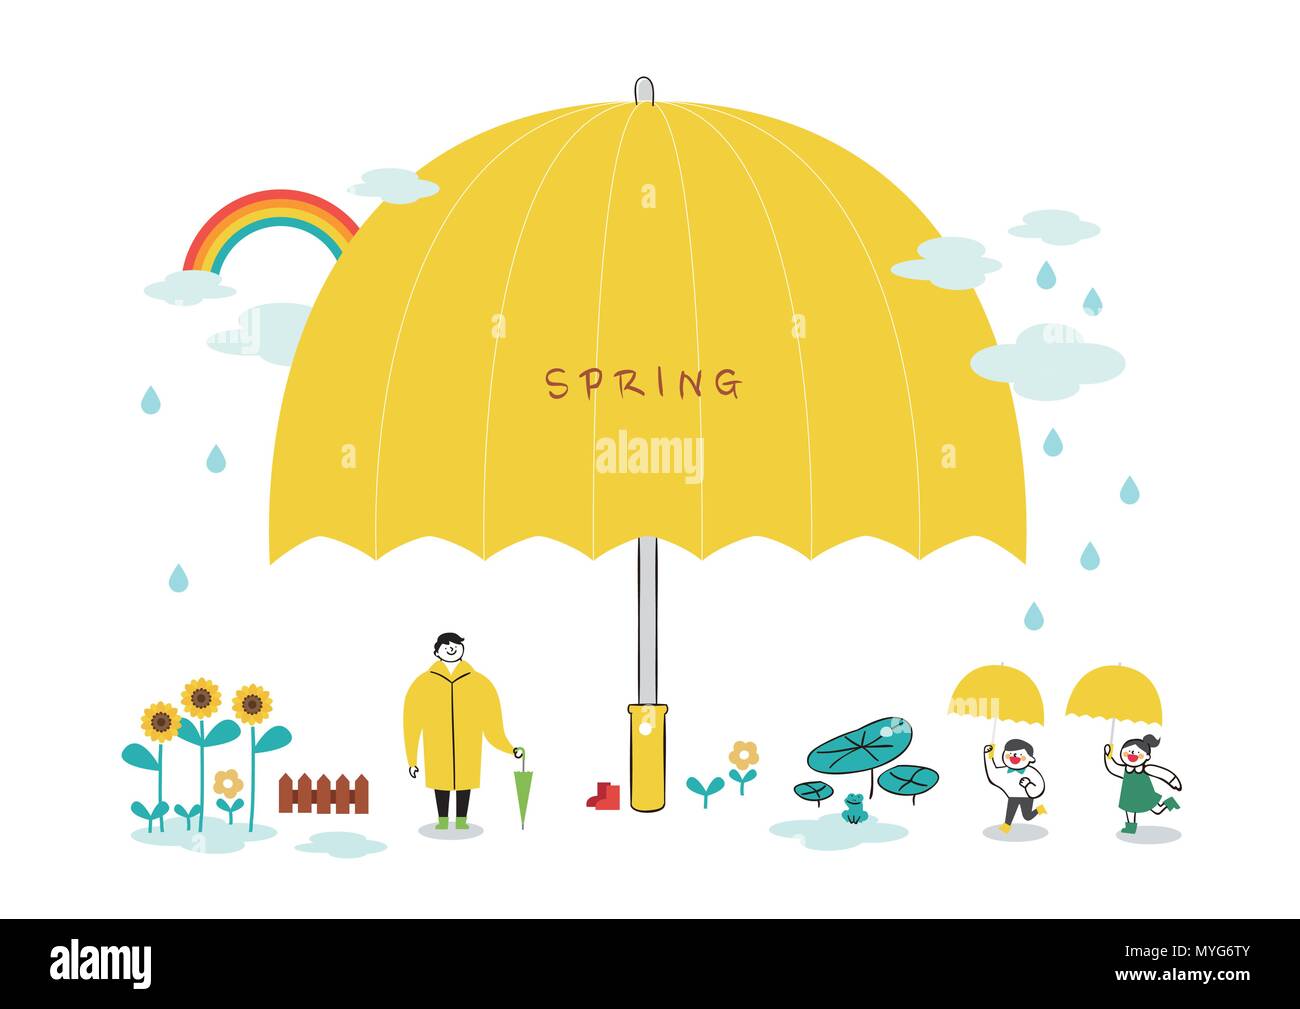 Vector illustration of spring object - flowers, the cherry tree, umbrella and so on. 002 Stock Vector